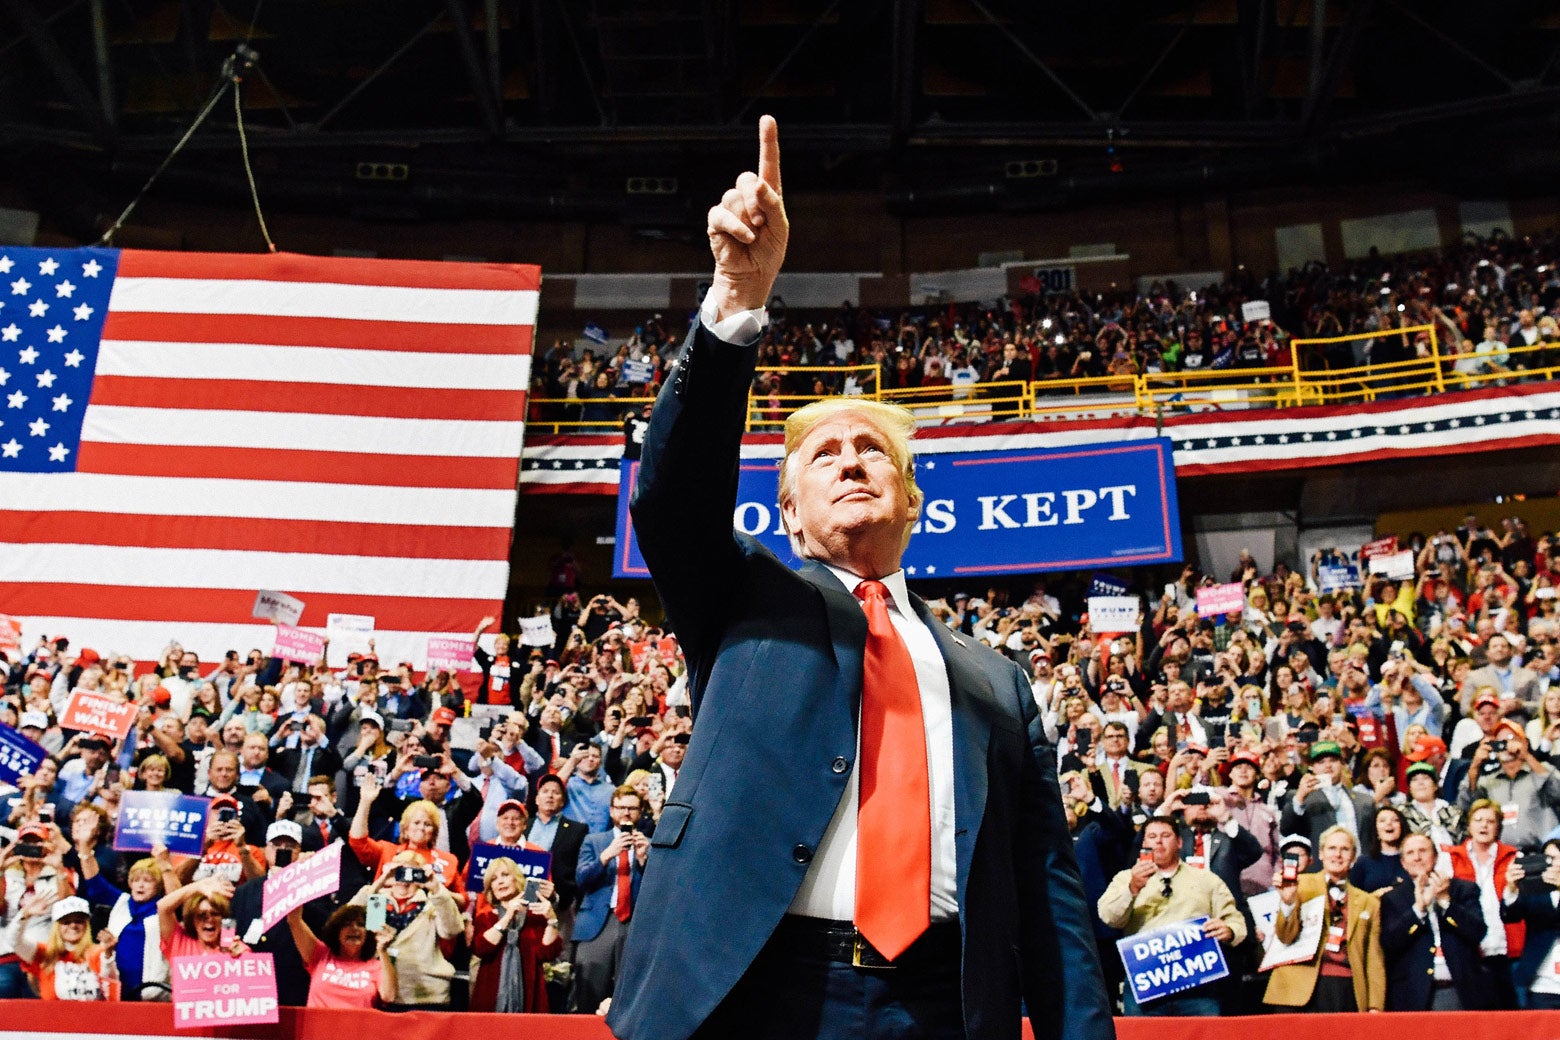 Donald Trump points at the crowd at a rally.